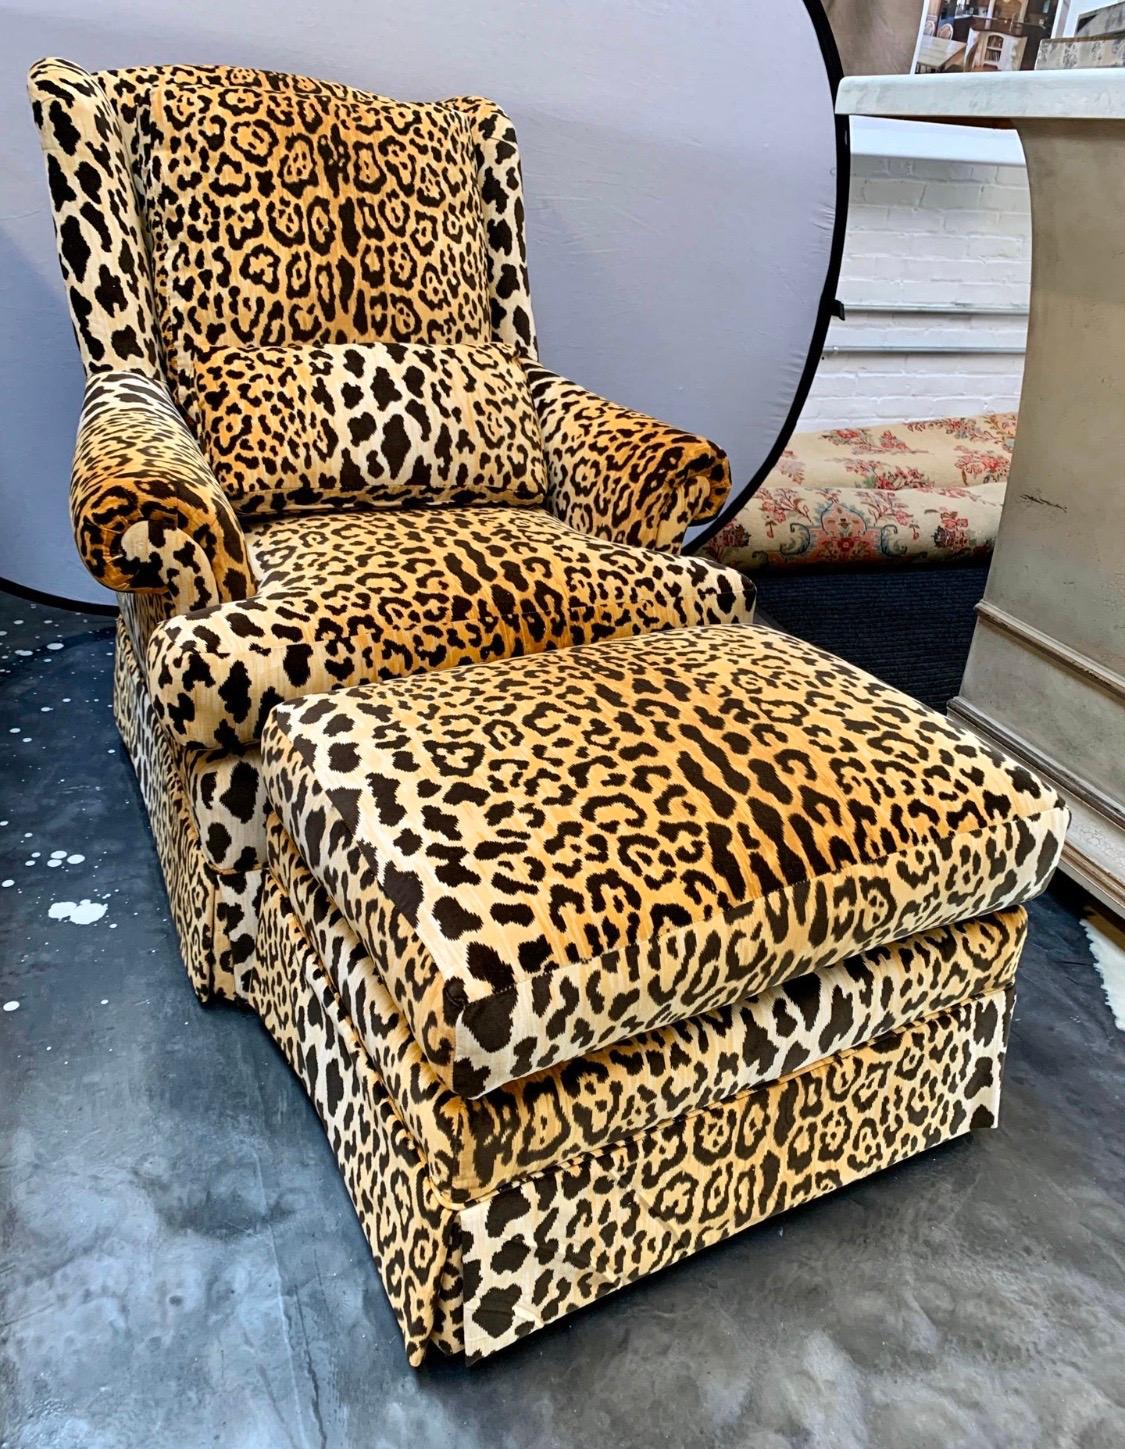 Newly reupholstered in a velvet leopard print, this chair and matching ottoman has 360 degree swivel capability. It not only looks magnificent, it sits great also. The ottoman dimensions are 28